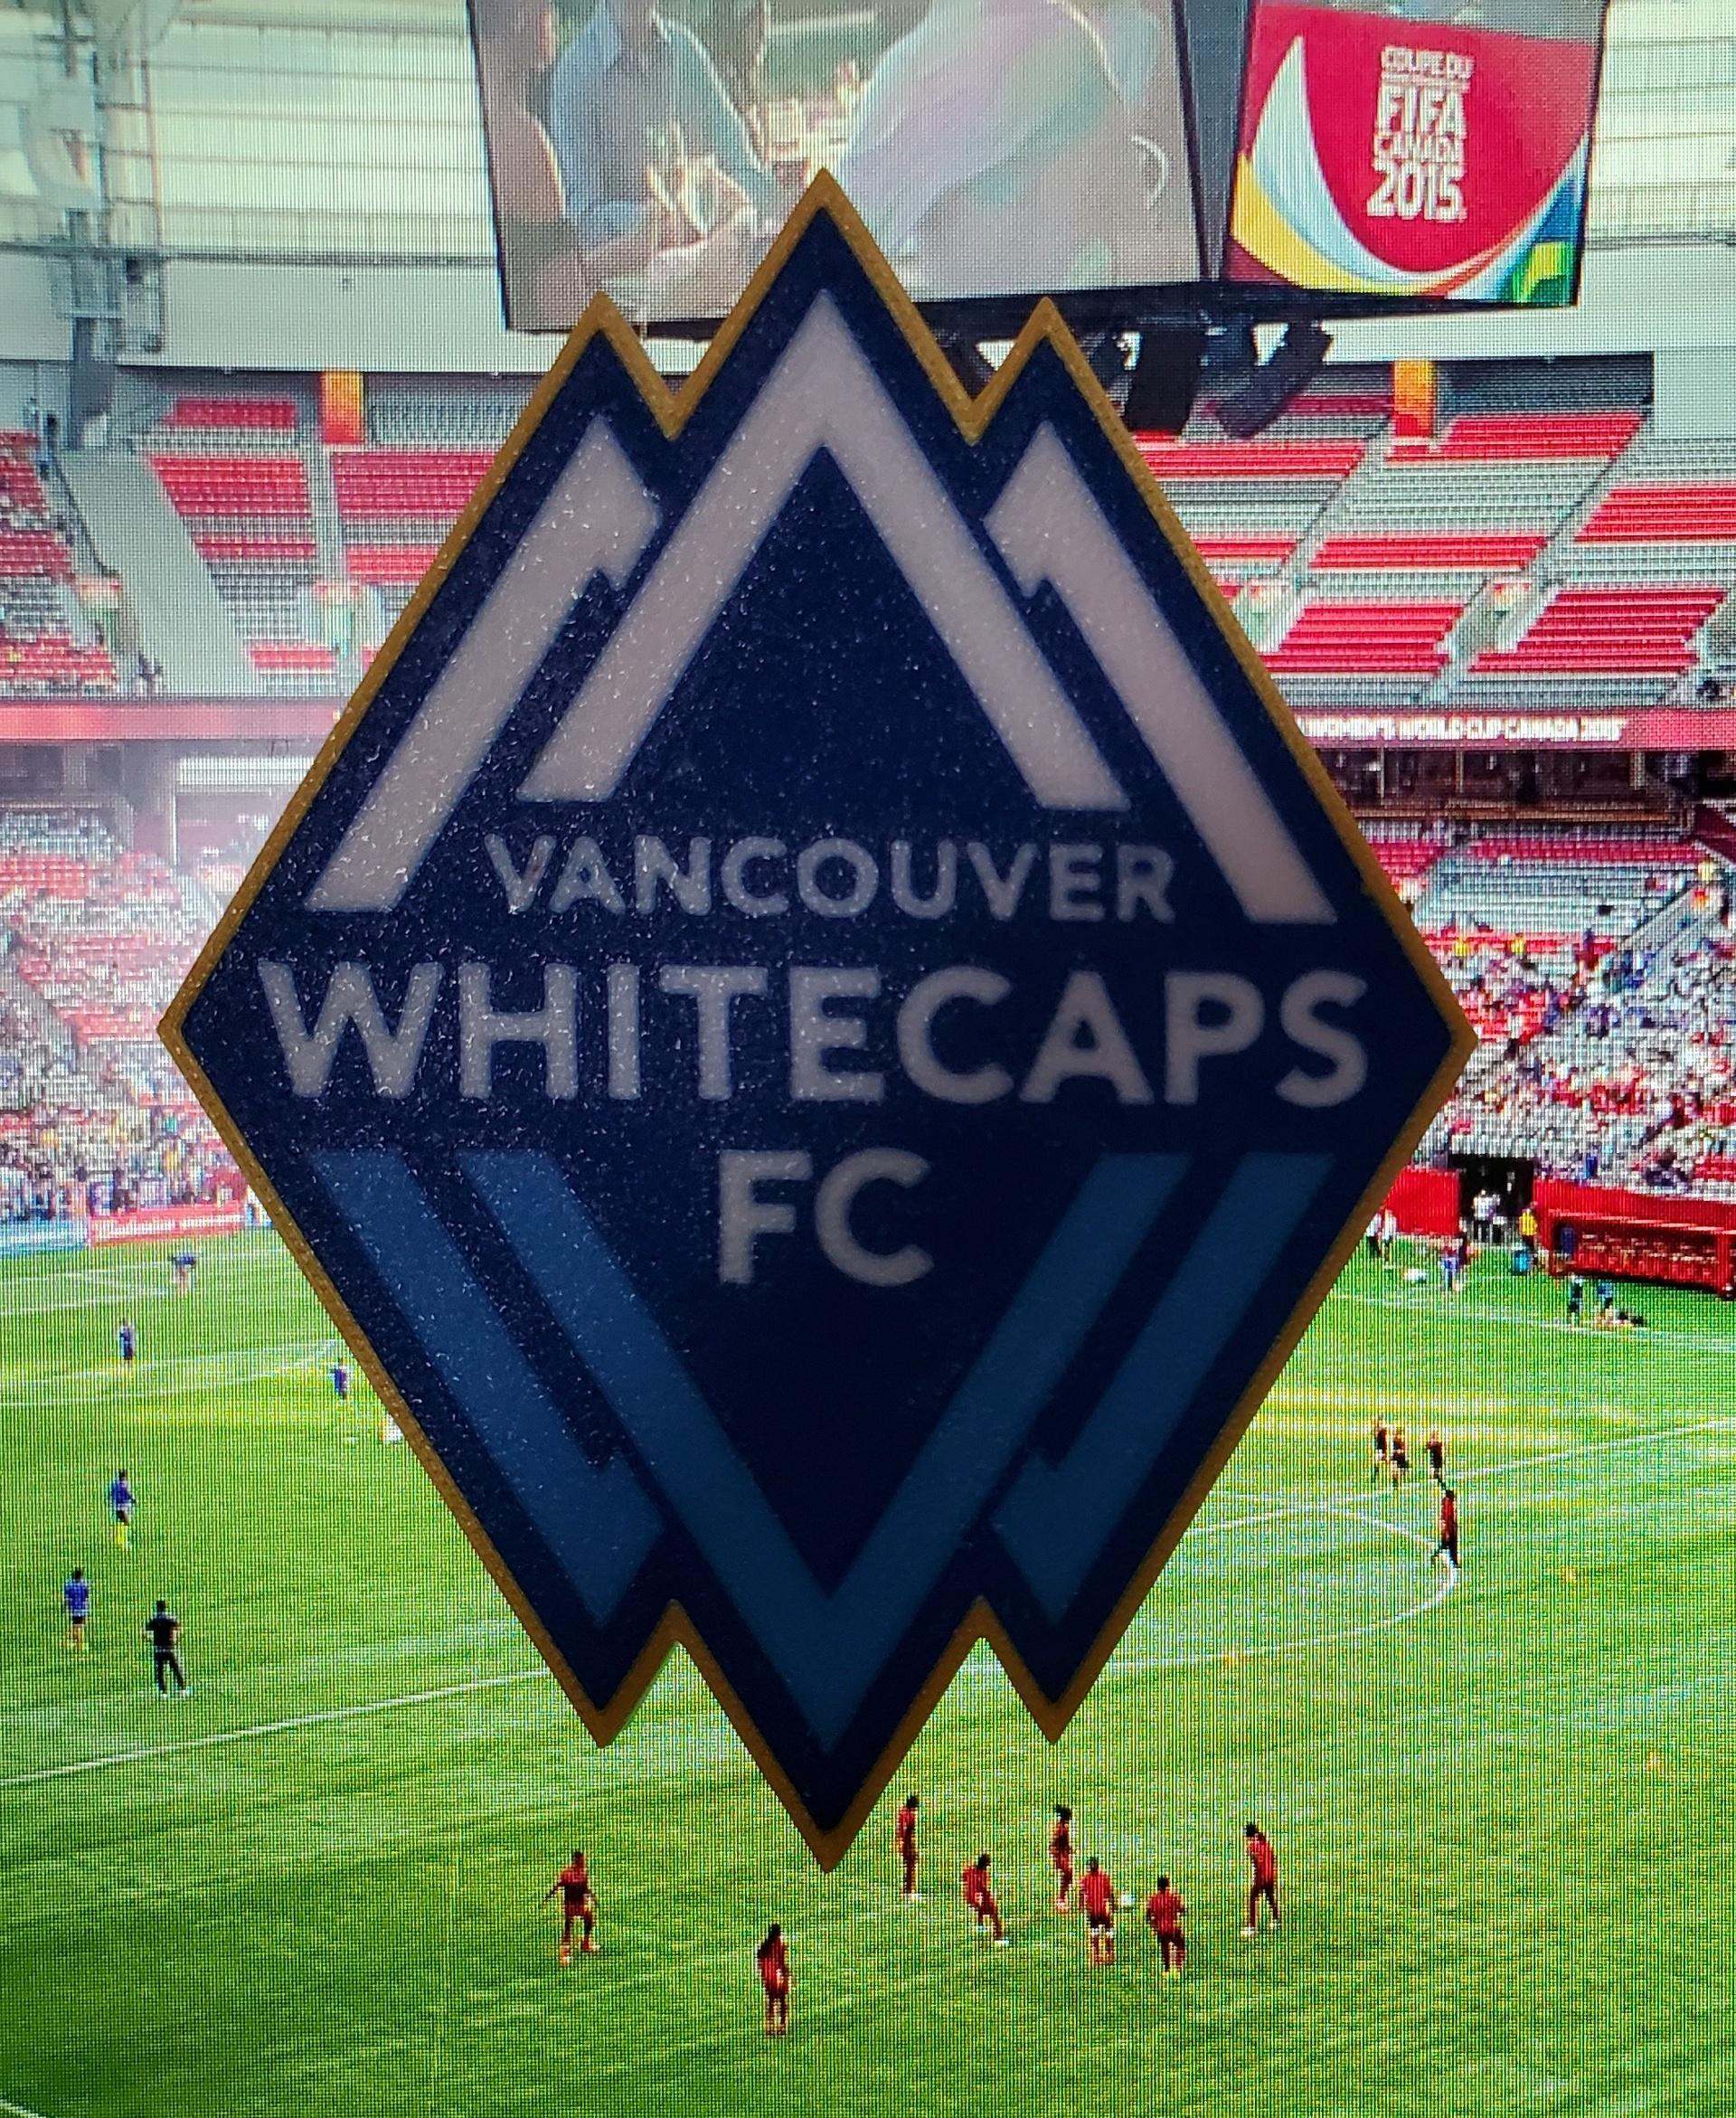 AMS / MMU Vancouver Whitecaps FC coaster or plaque - chose the wrong color in the AMS, border should be grey - 3d model